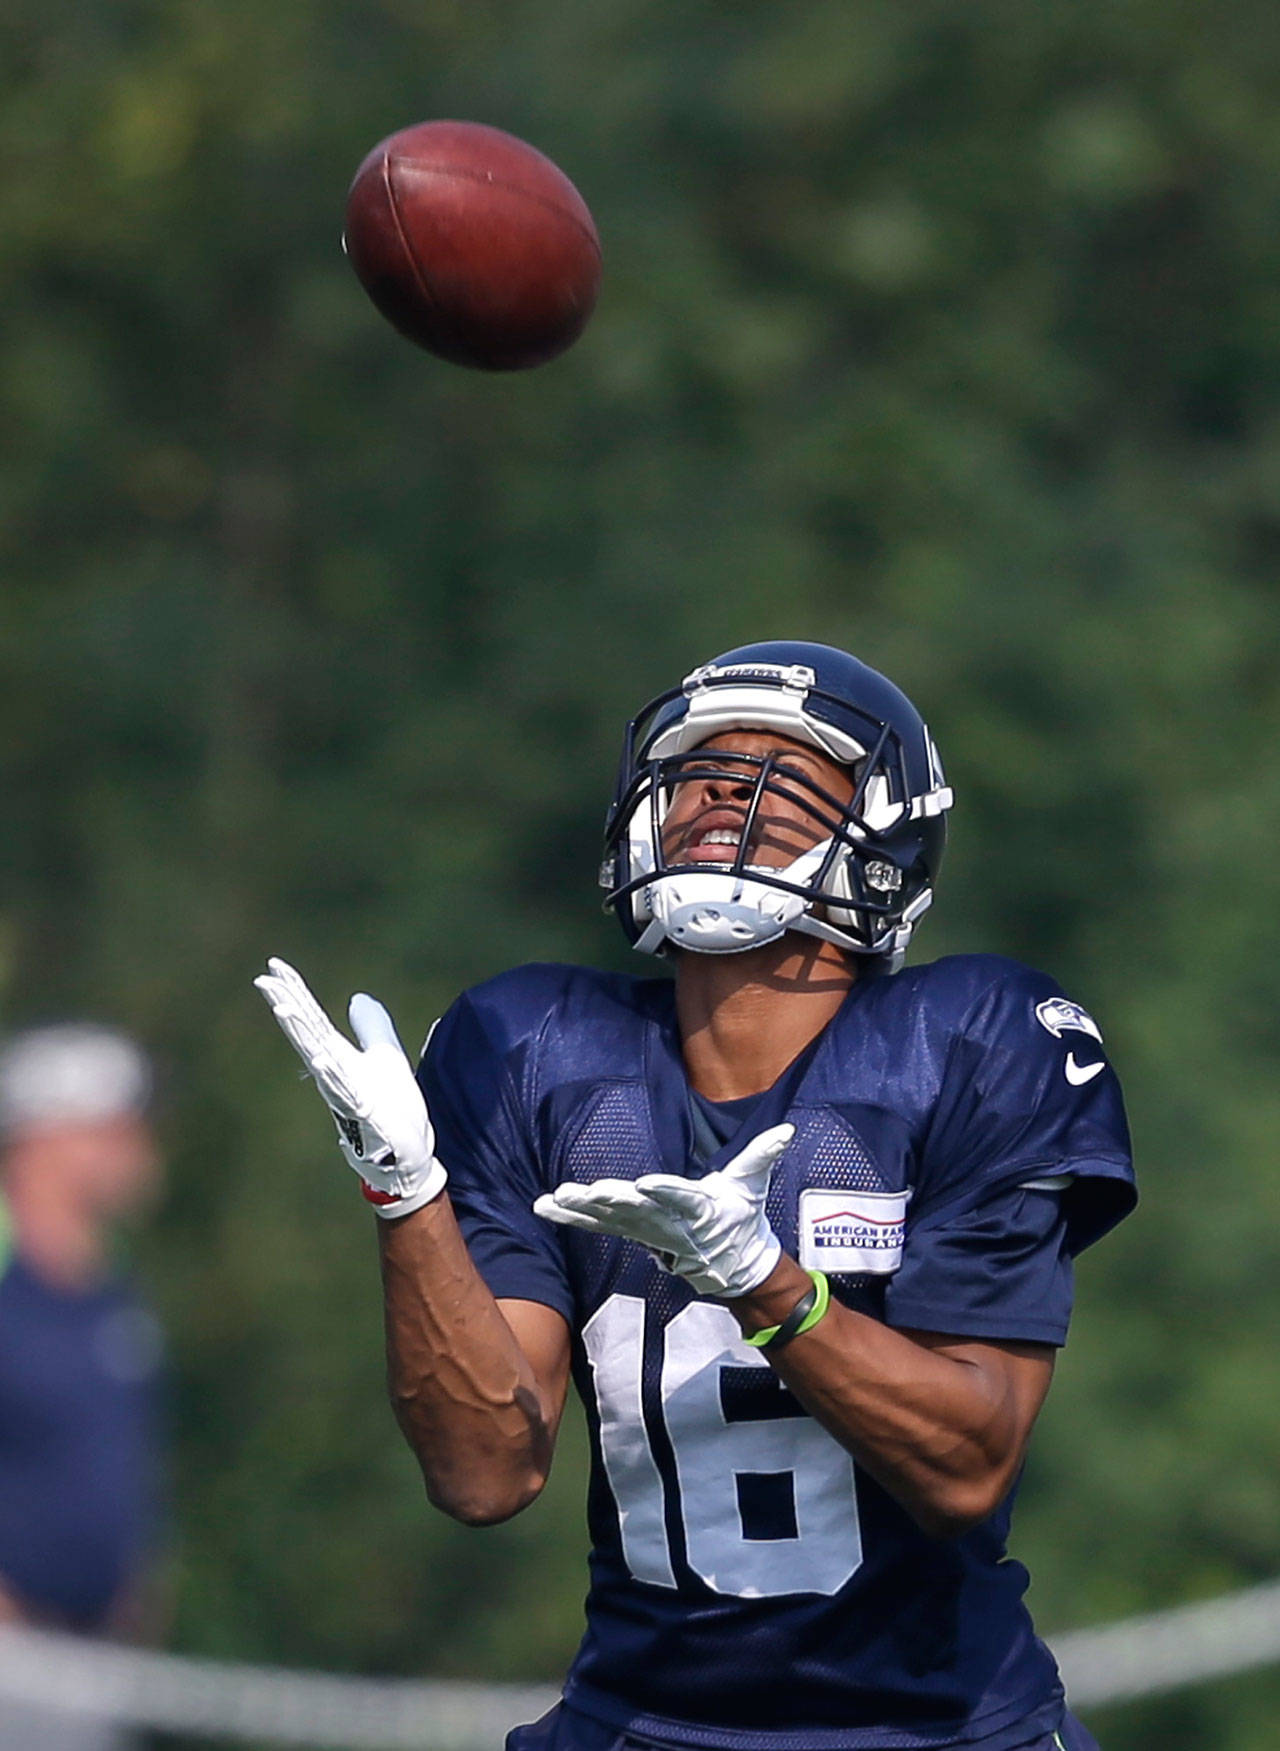 Seattle’s Tyler Lockett reaches to catch a ball Friday during a training camp session in Renton. (AP Photo/Elaine Thompson)